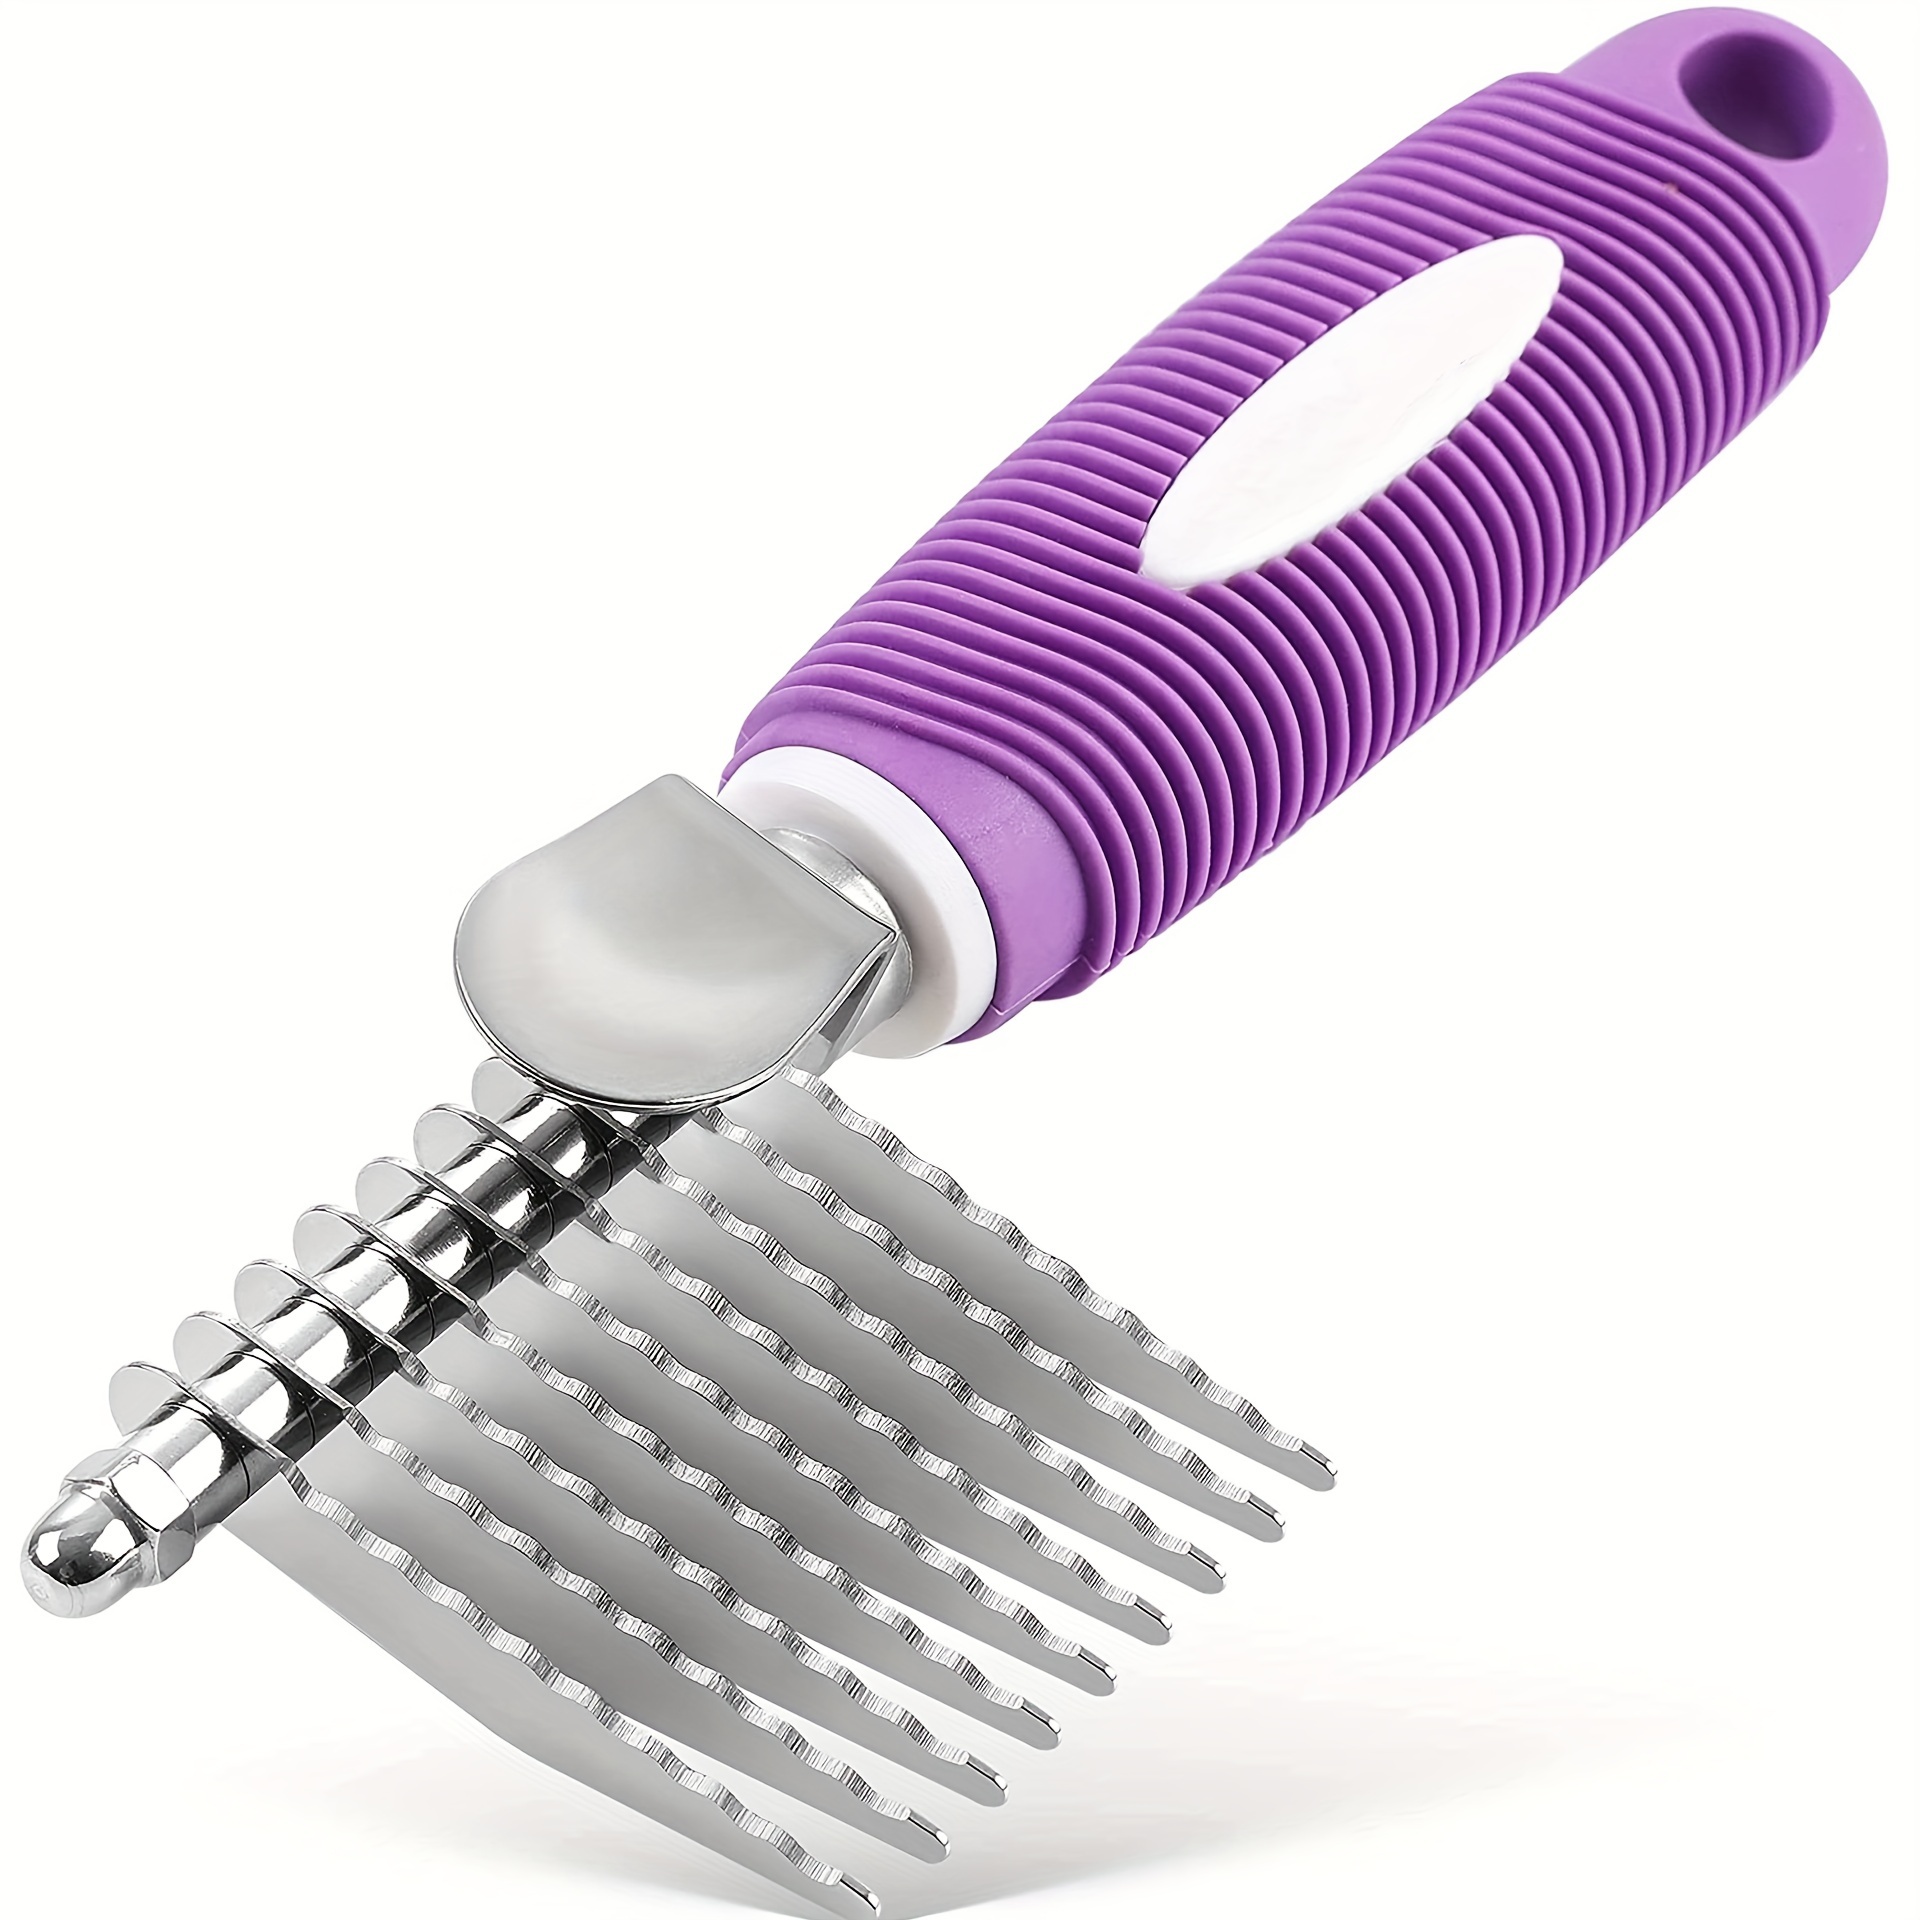 

1pc Dematting Fur Rake Comb Brush Tool - Stainless Steel Blades With Anti-slip Handle, For Dogs And Cats, Ideal For Goldendoodle Grooming